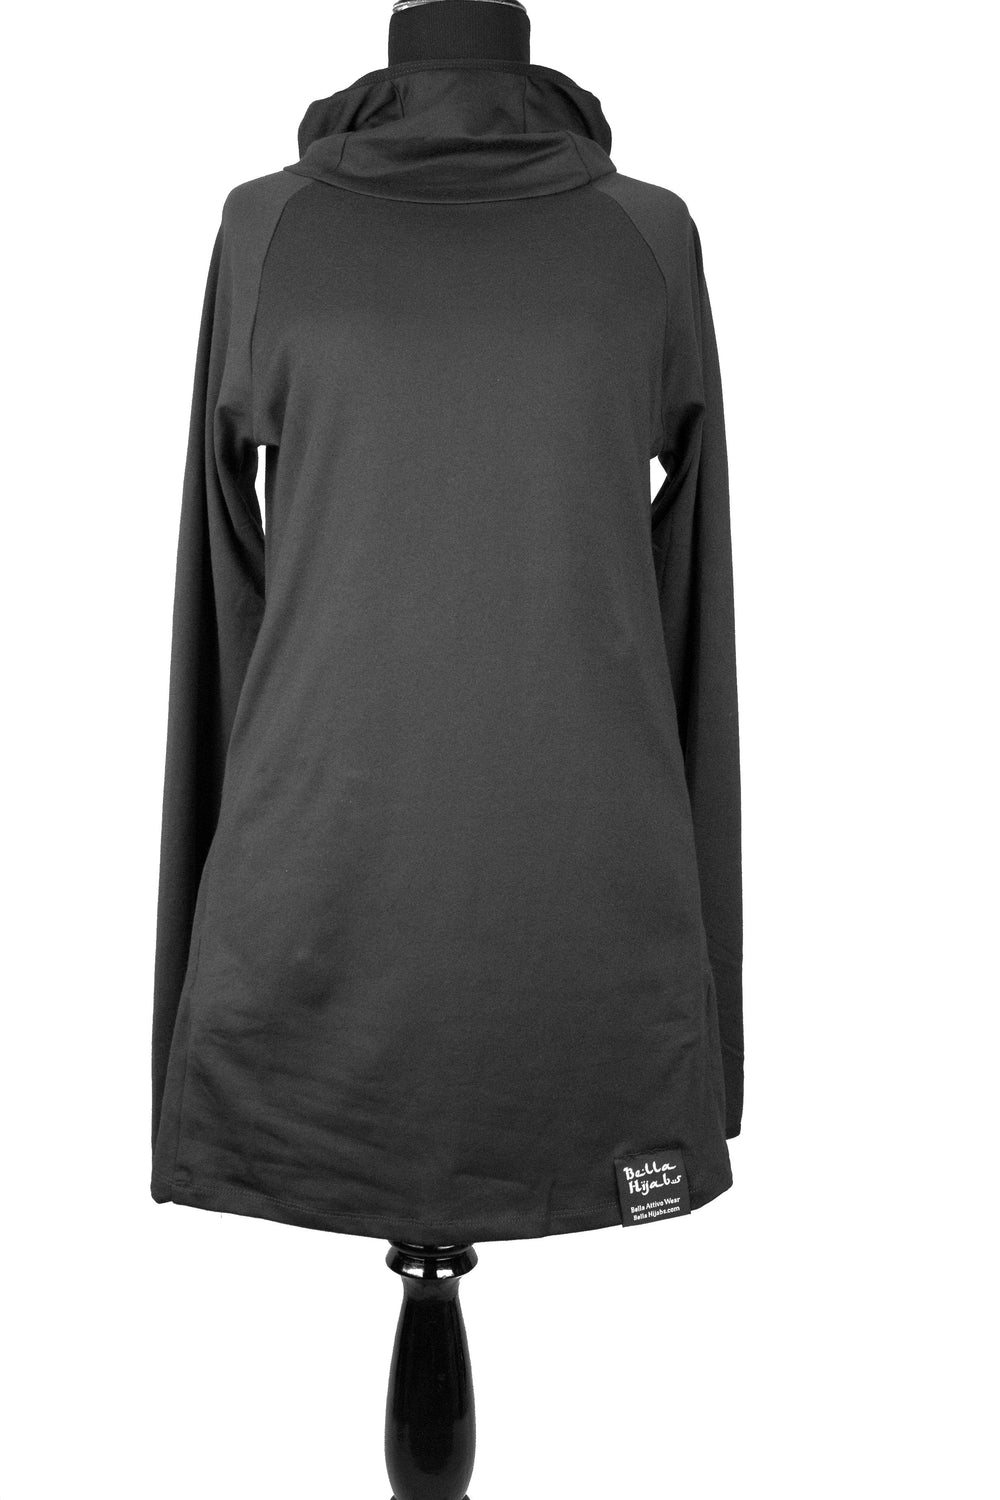 black long sleeve work out top with a hijab attached